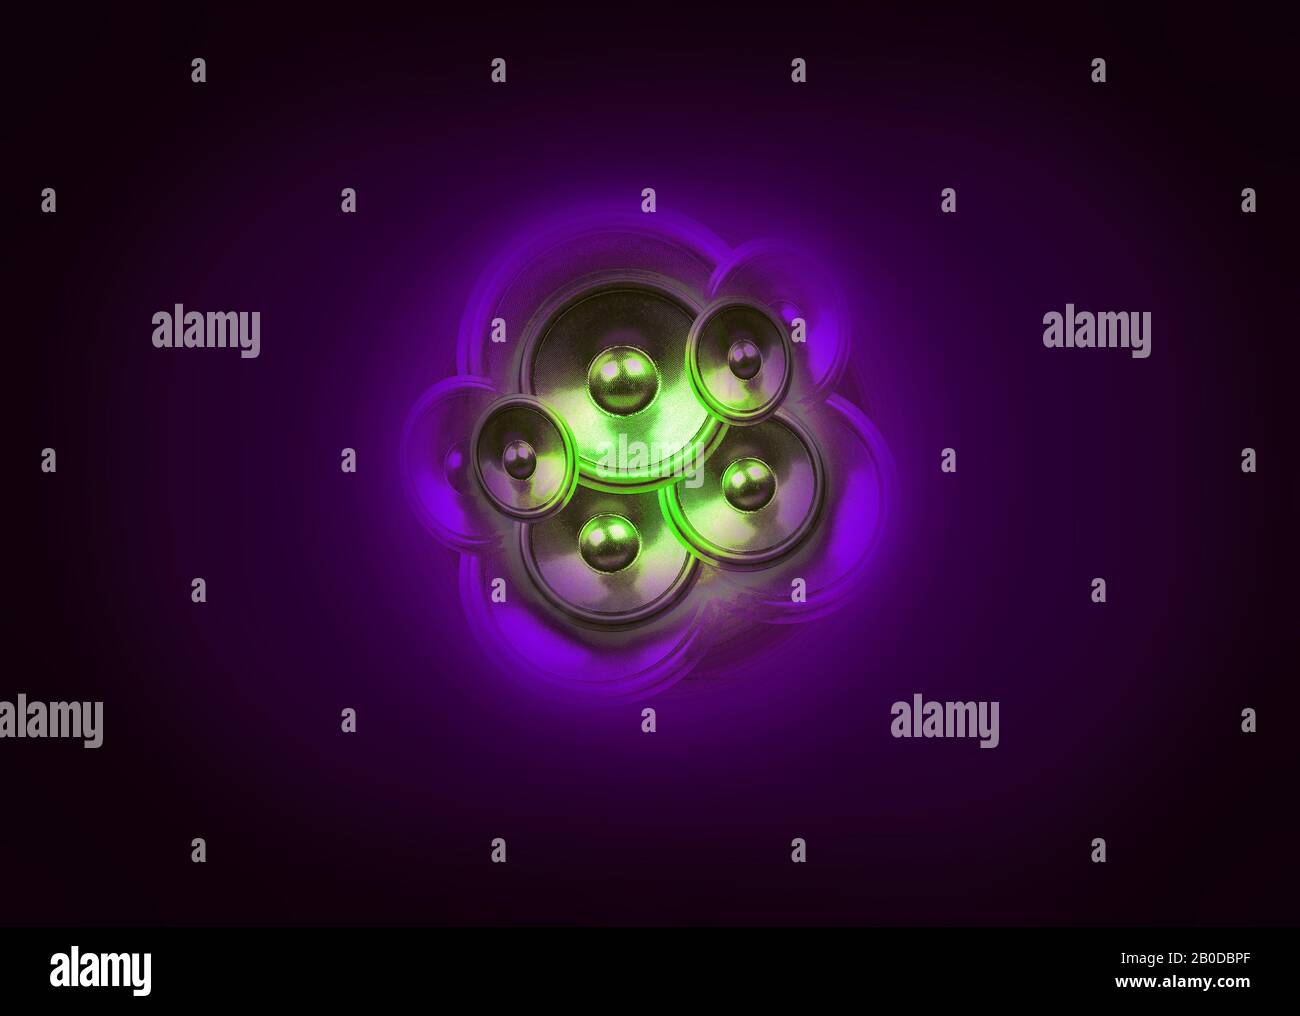 Green audio speakers on a dark purple background with vignette Stock Photo